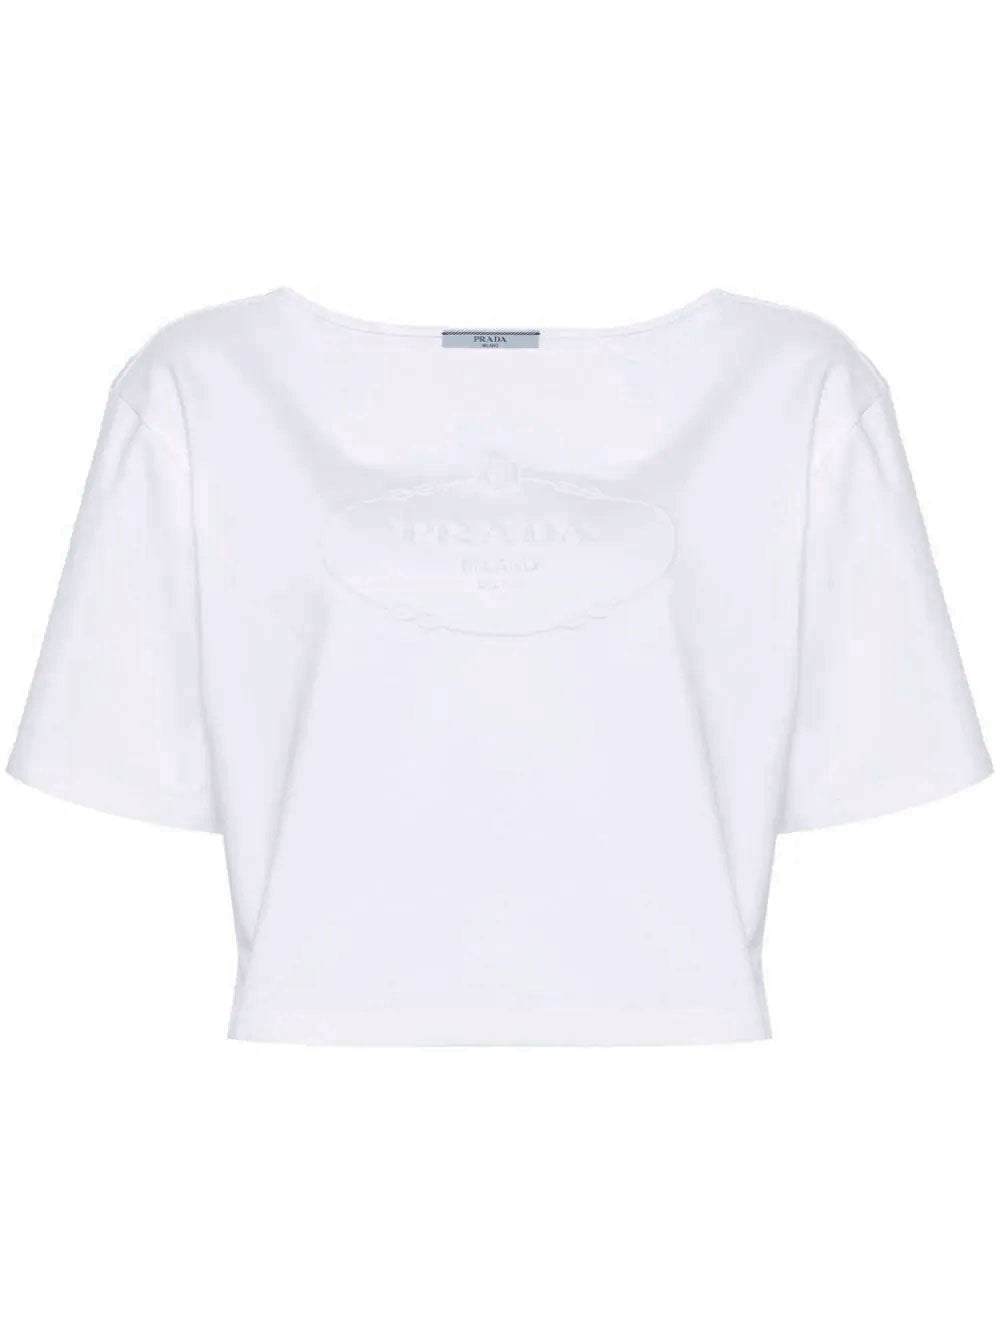 Top Prada White size 38 IT in Synthetic - 37039487